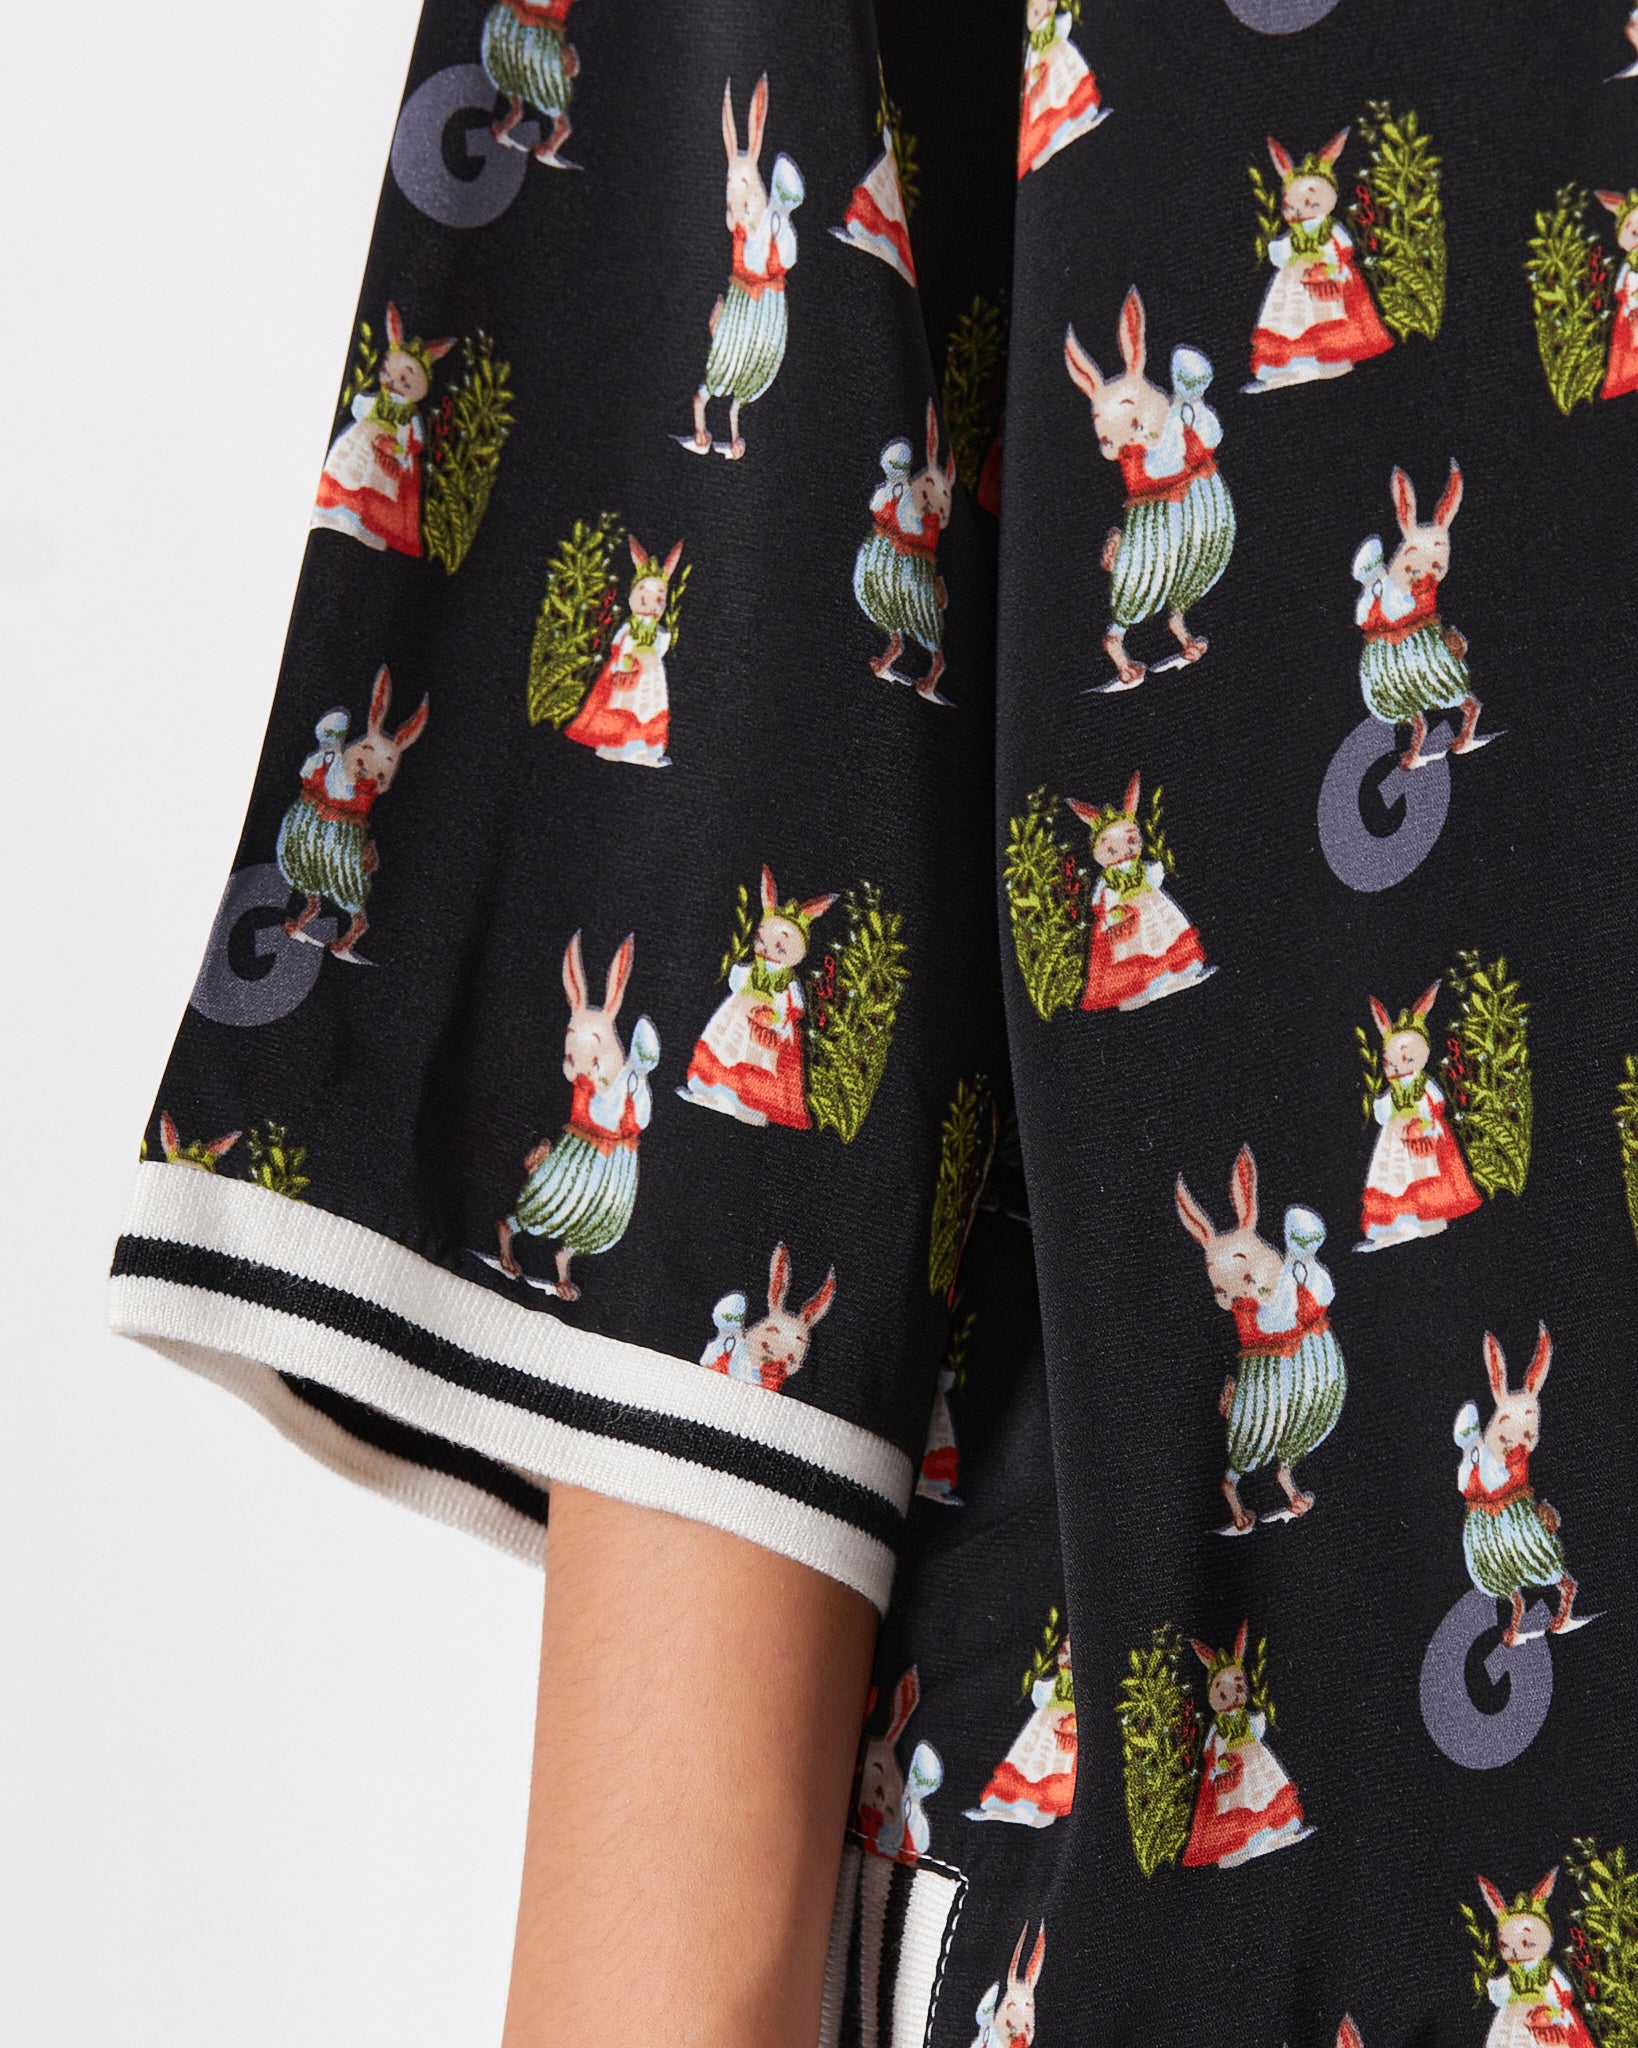 Bunny Over Printed Lady T-Shirt 15.90